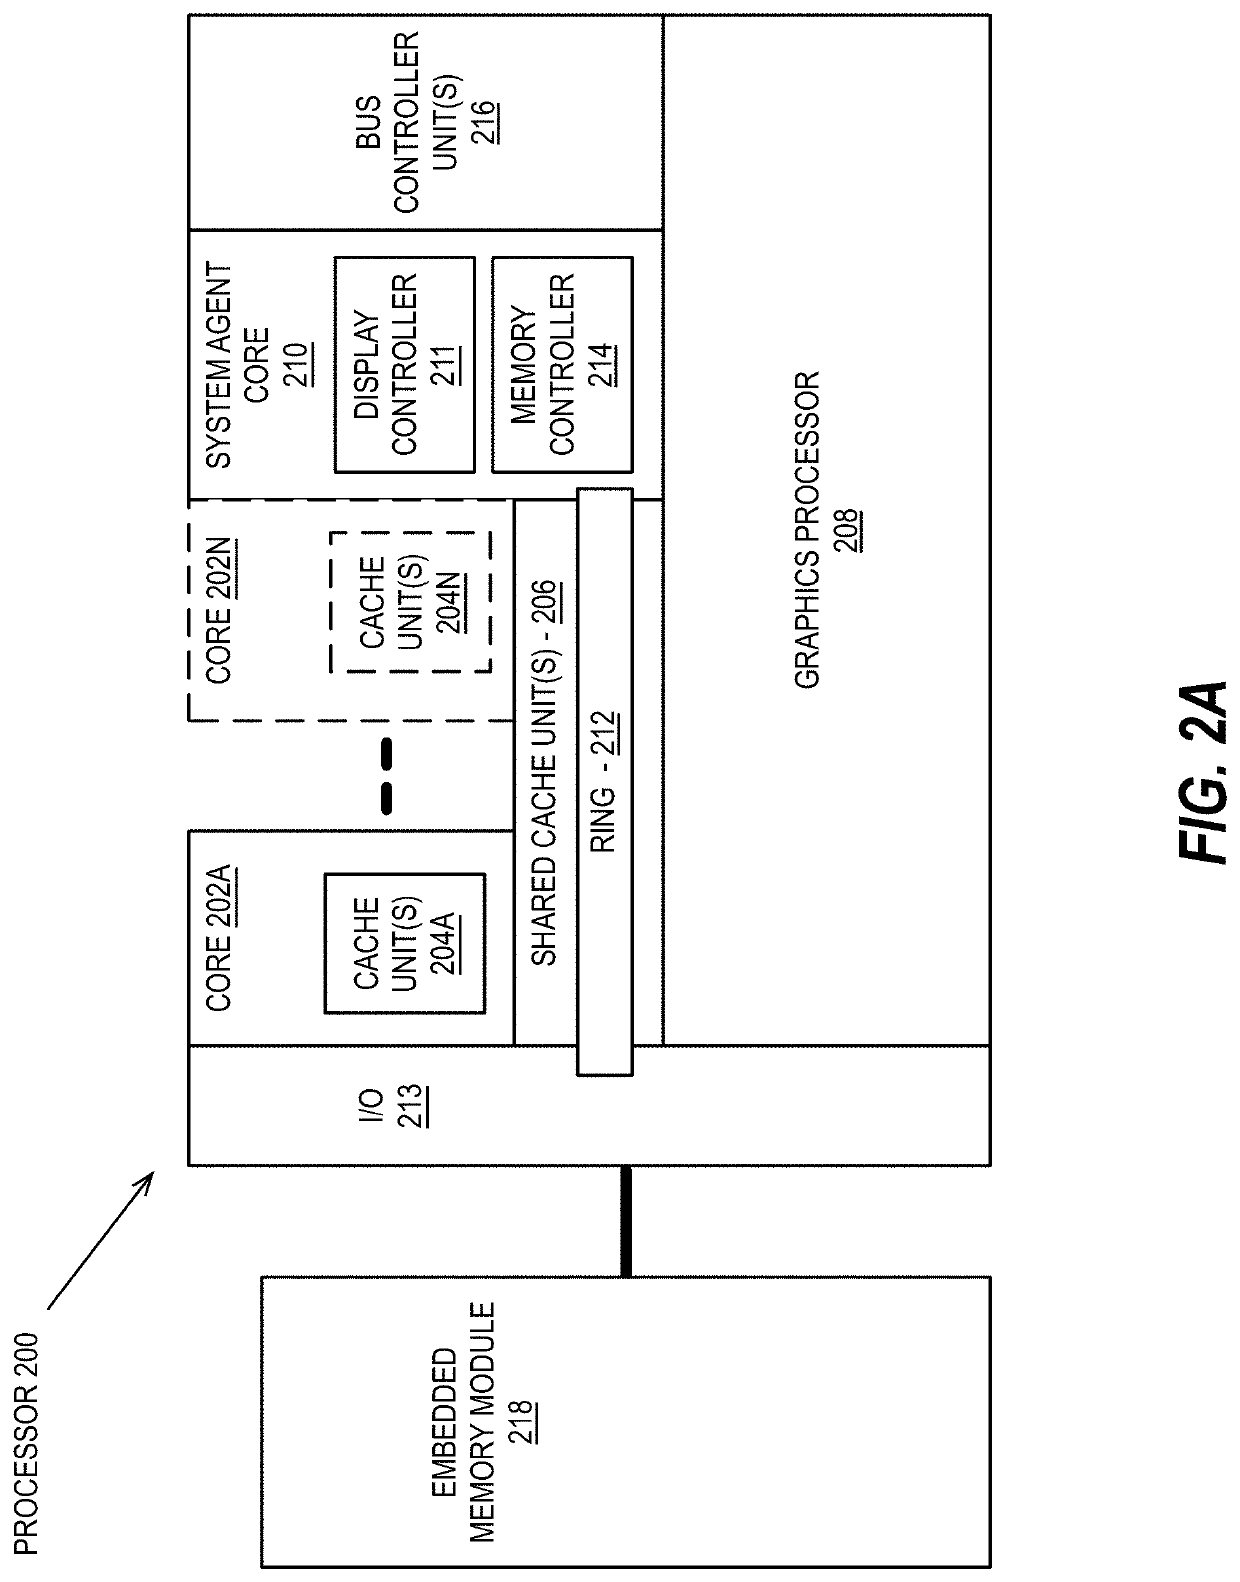 Apparatus and method for performing box queries in ray traversal hardware